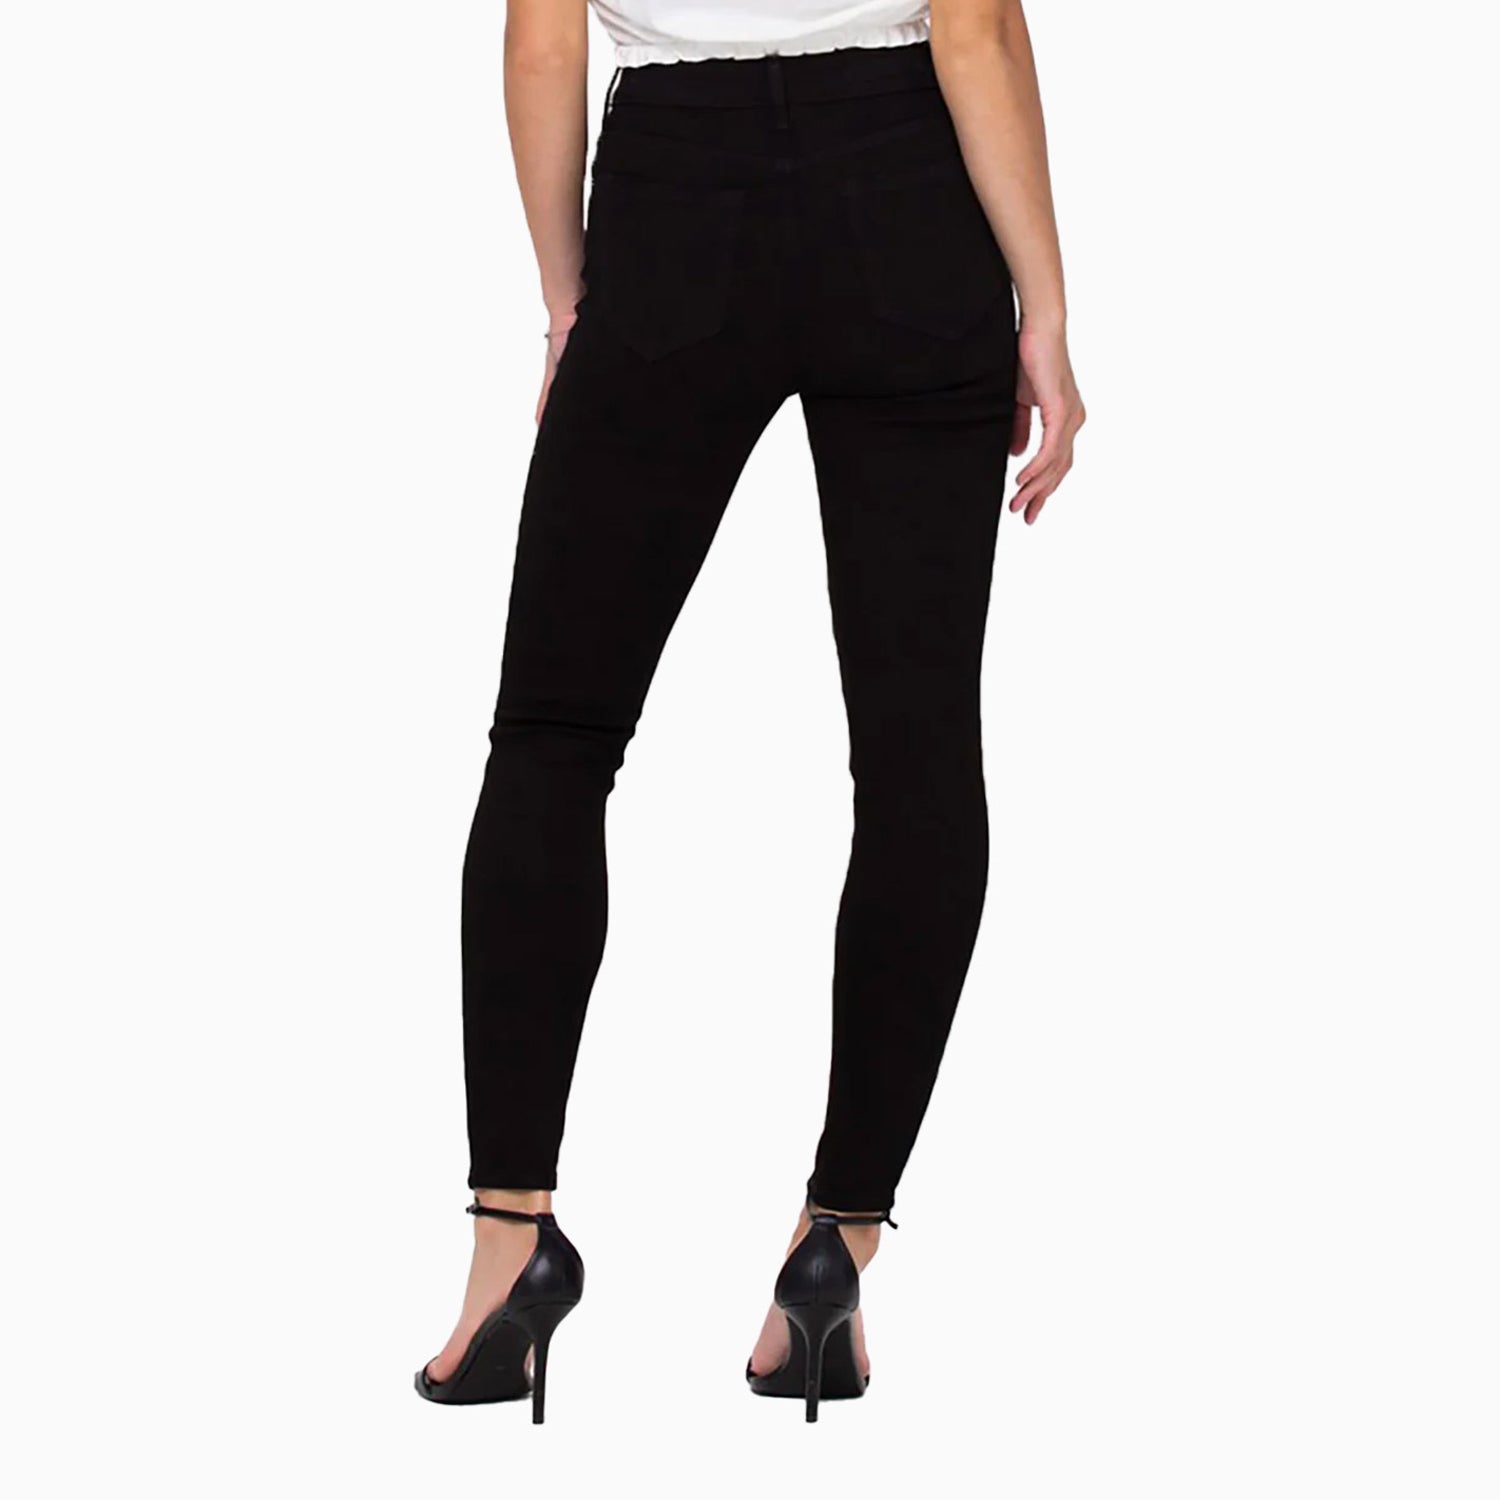 cello-jeans-womens-high-rise-ankle-skinny-pant-wv17594blk2